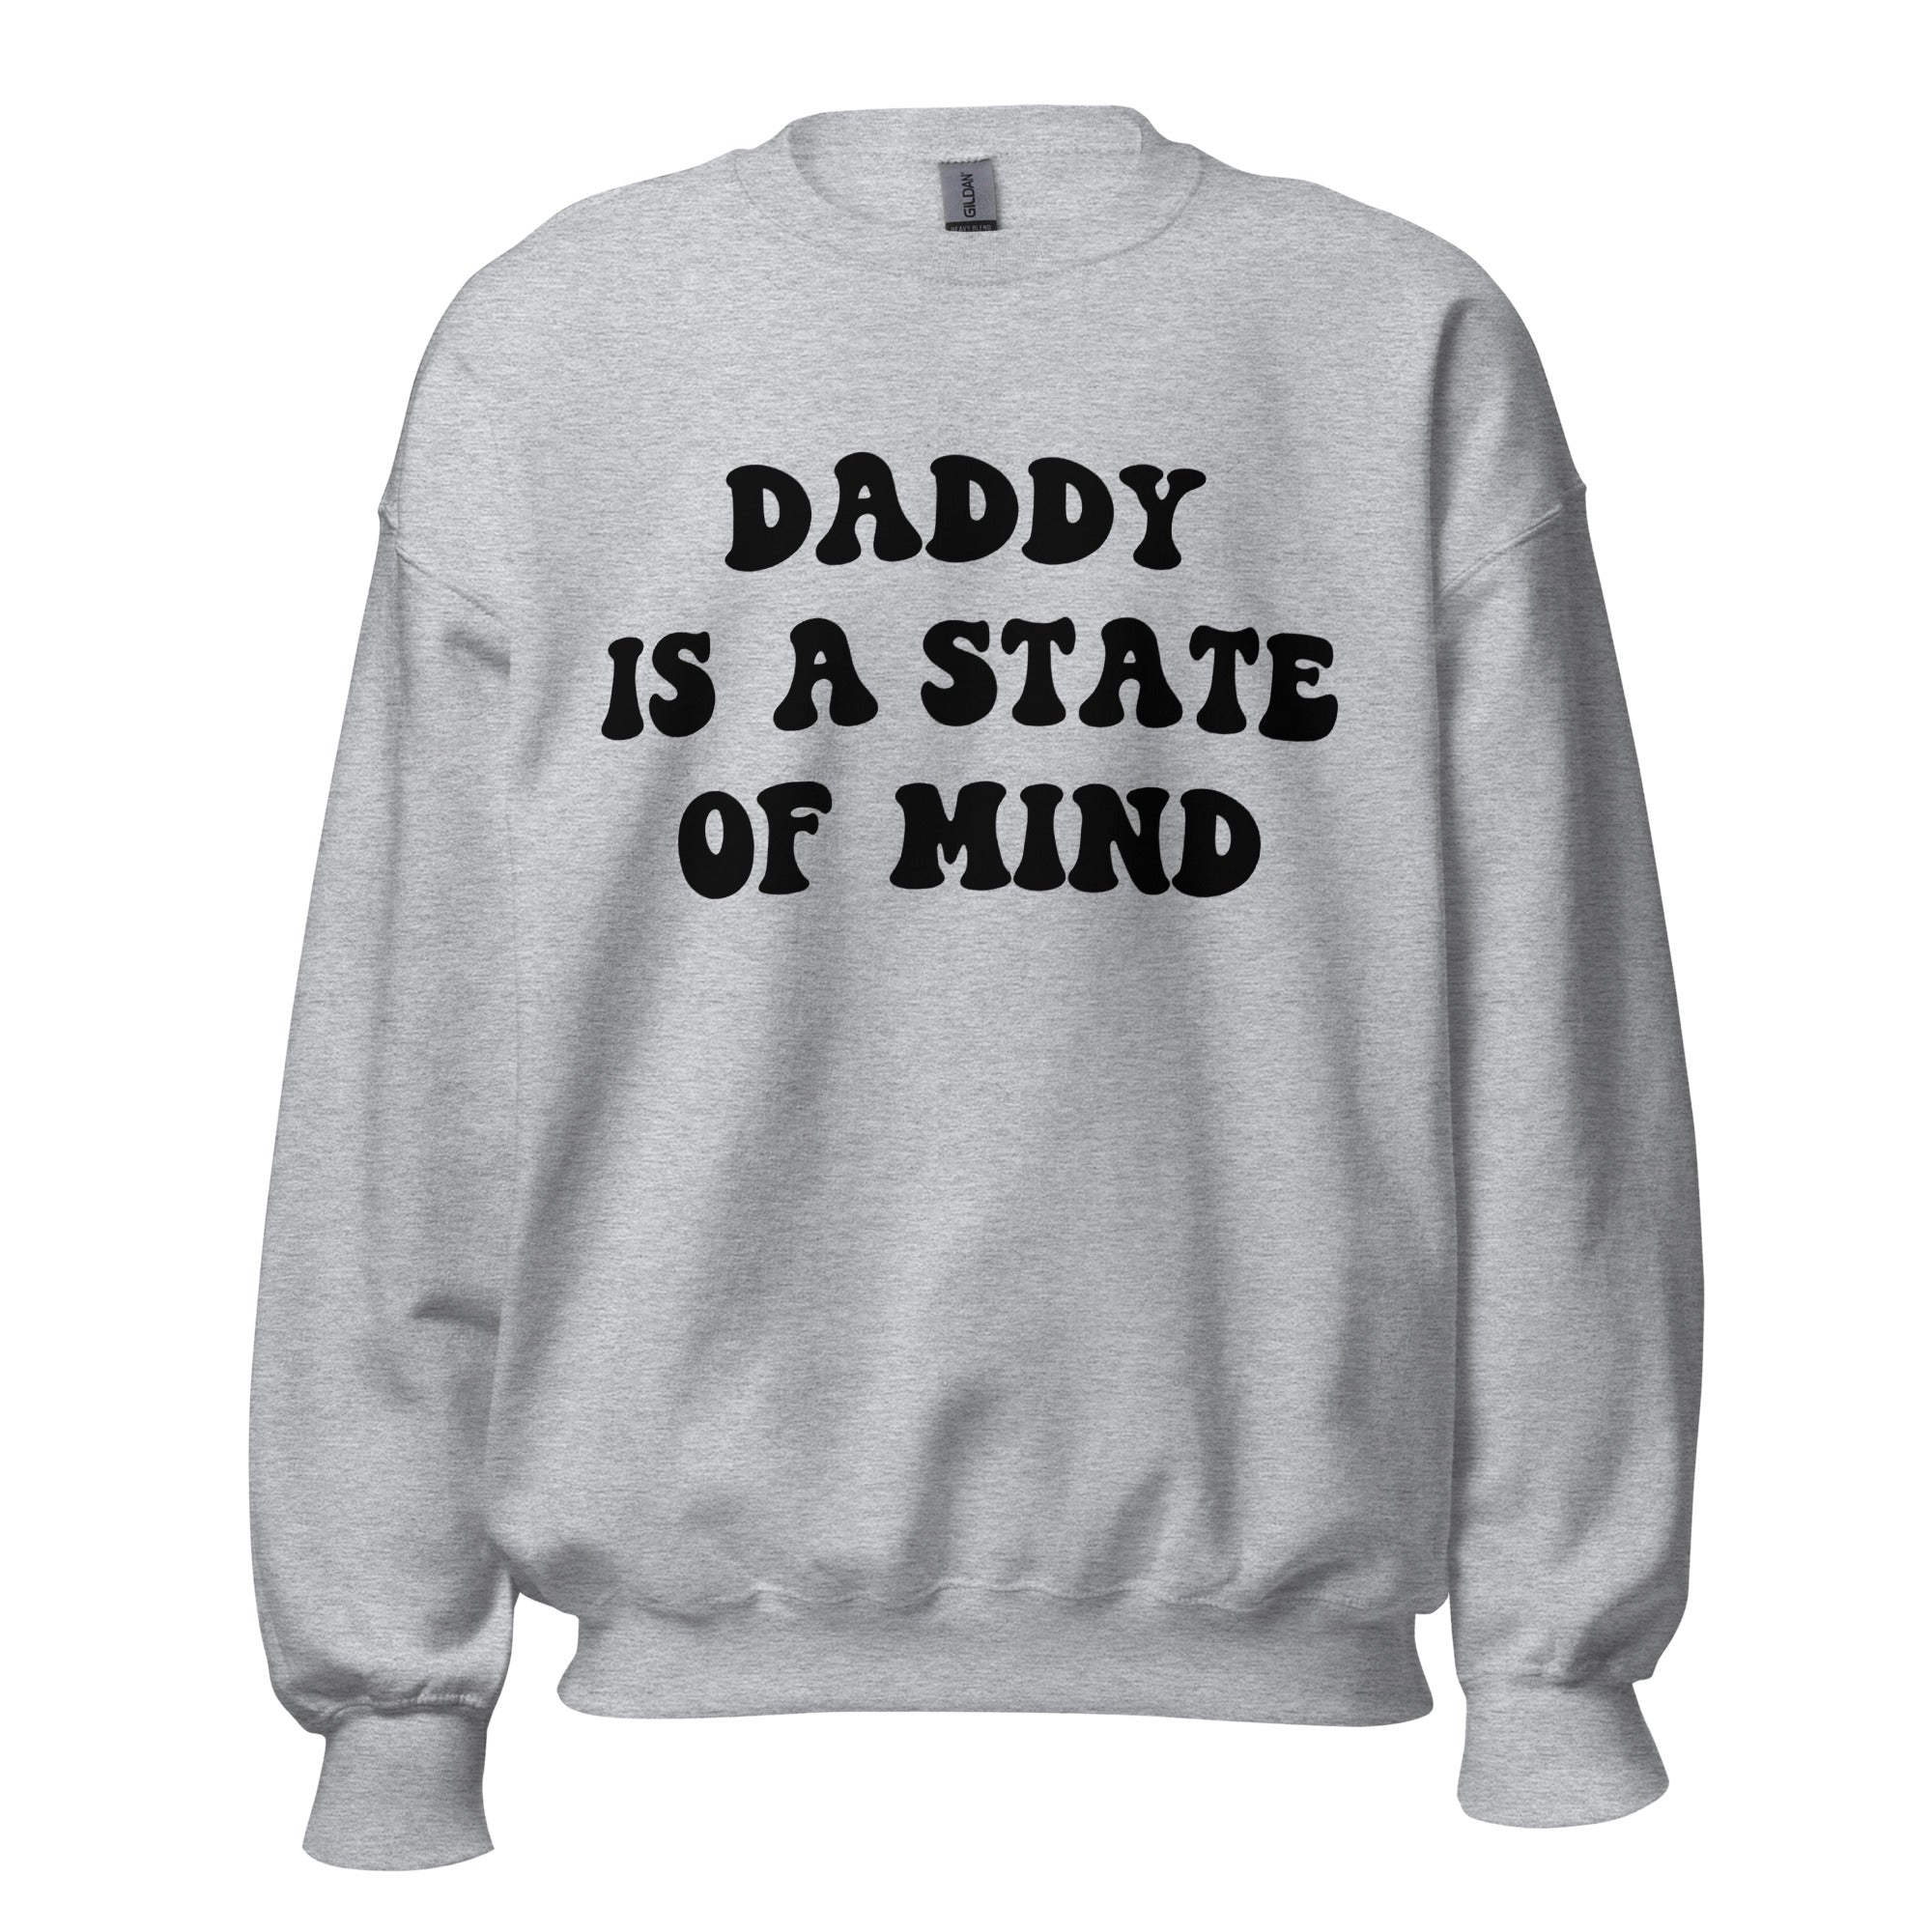 Daddy is a State of Mind Sweatshirt